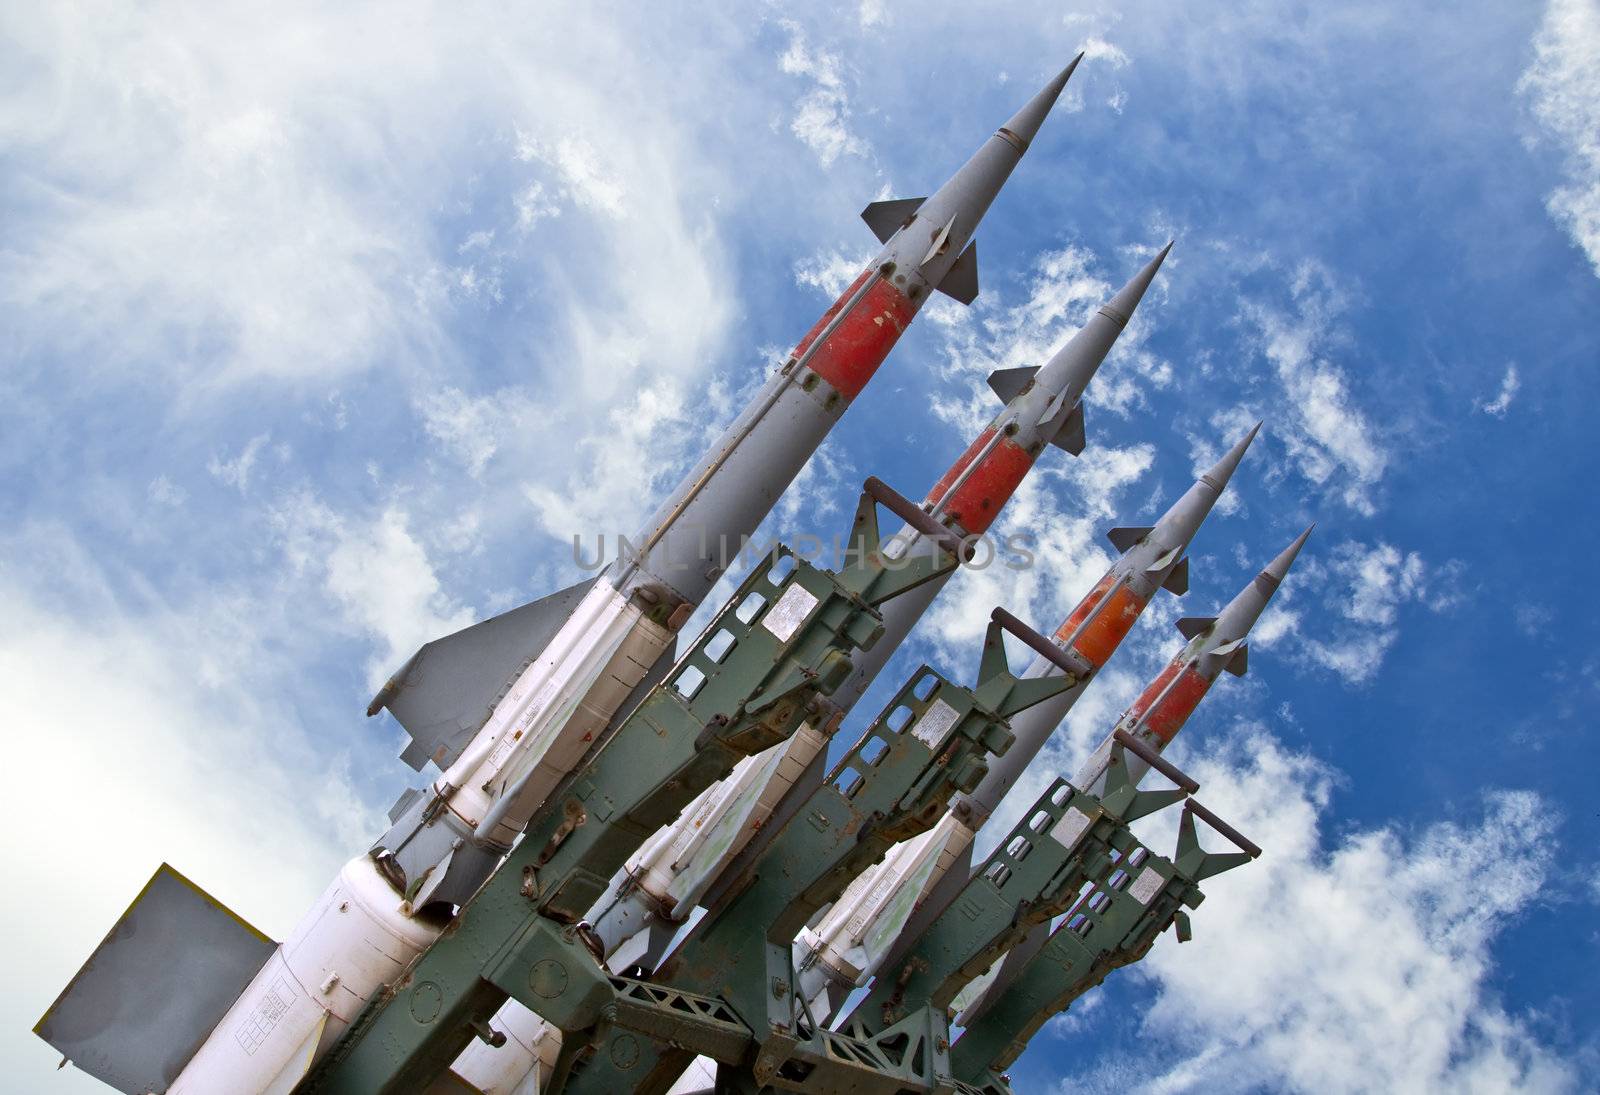 Several combat missiles aimed at the blue sky. Missile weapons.